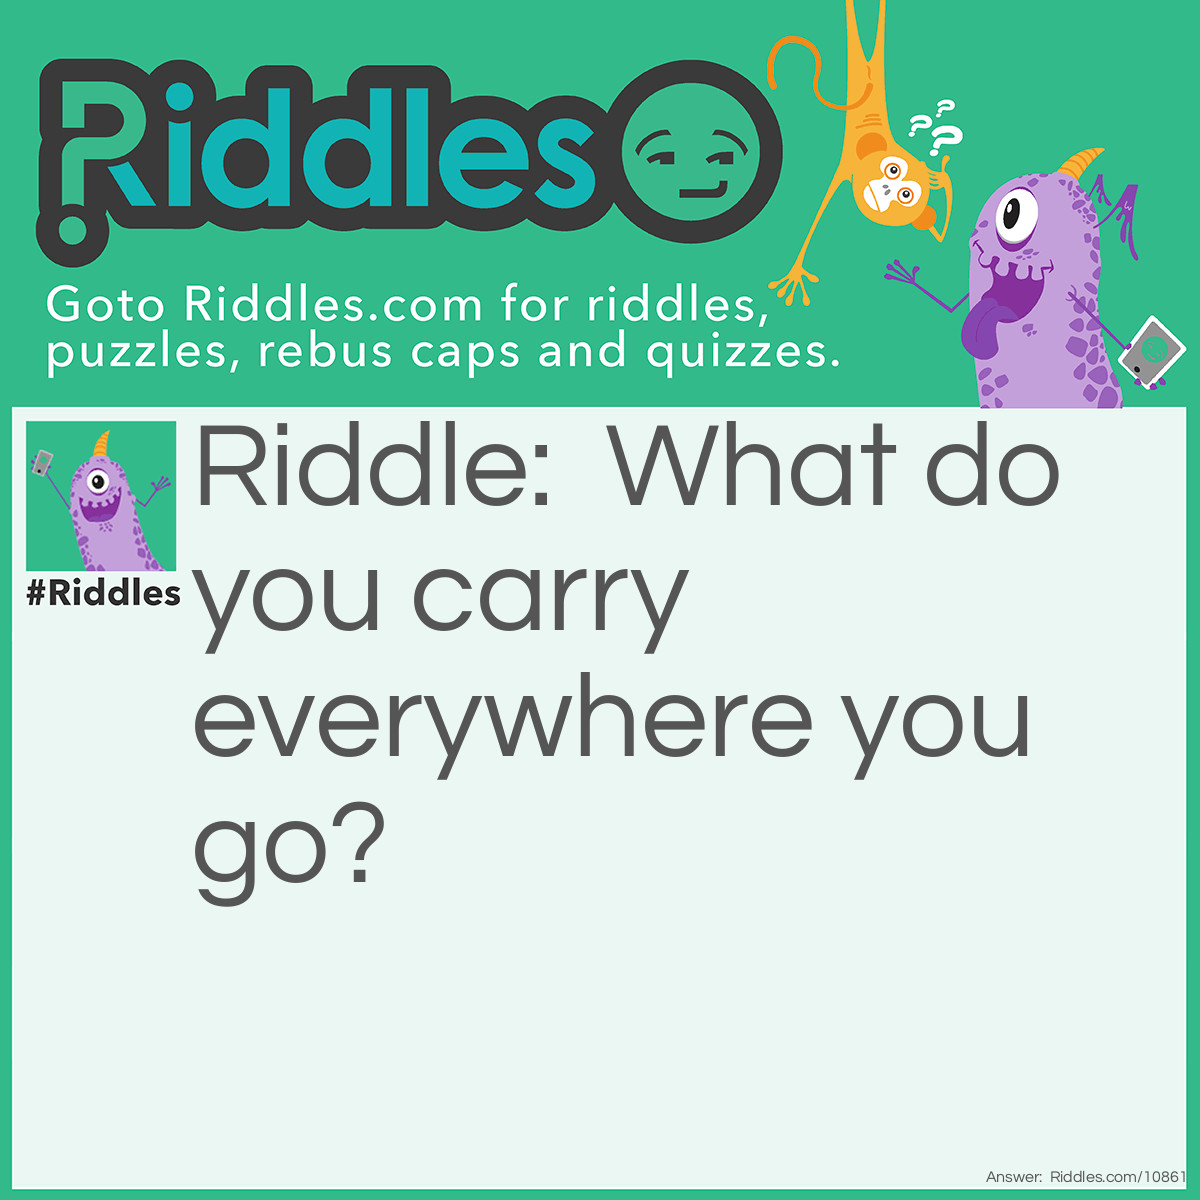 Riddle: What do you carry everywhere you go? Answer: Your shadow!